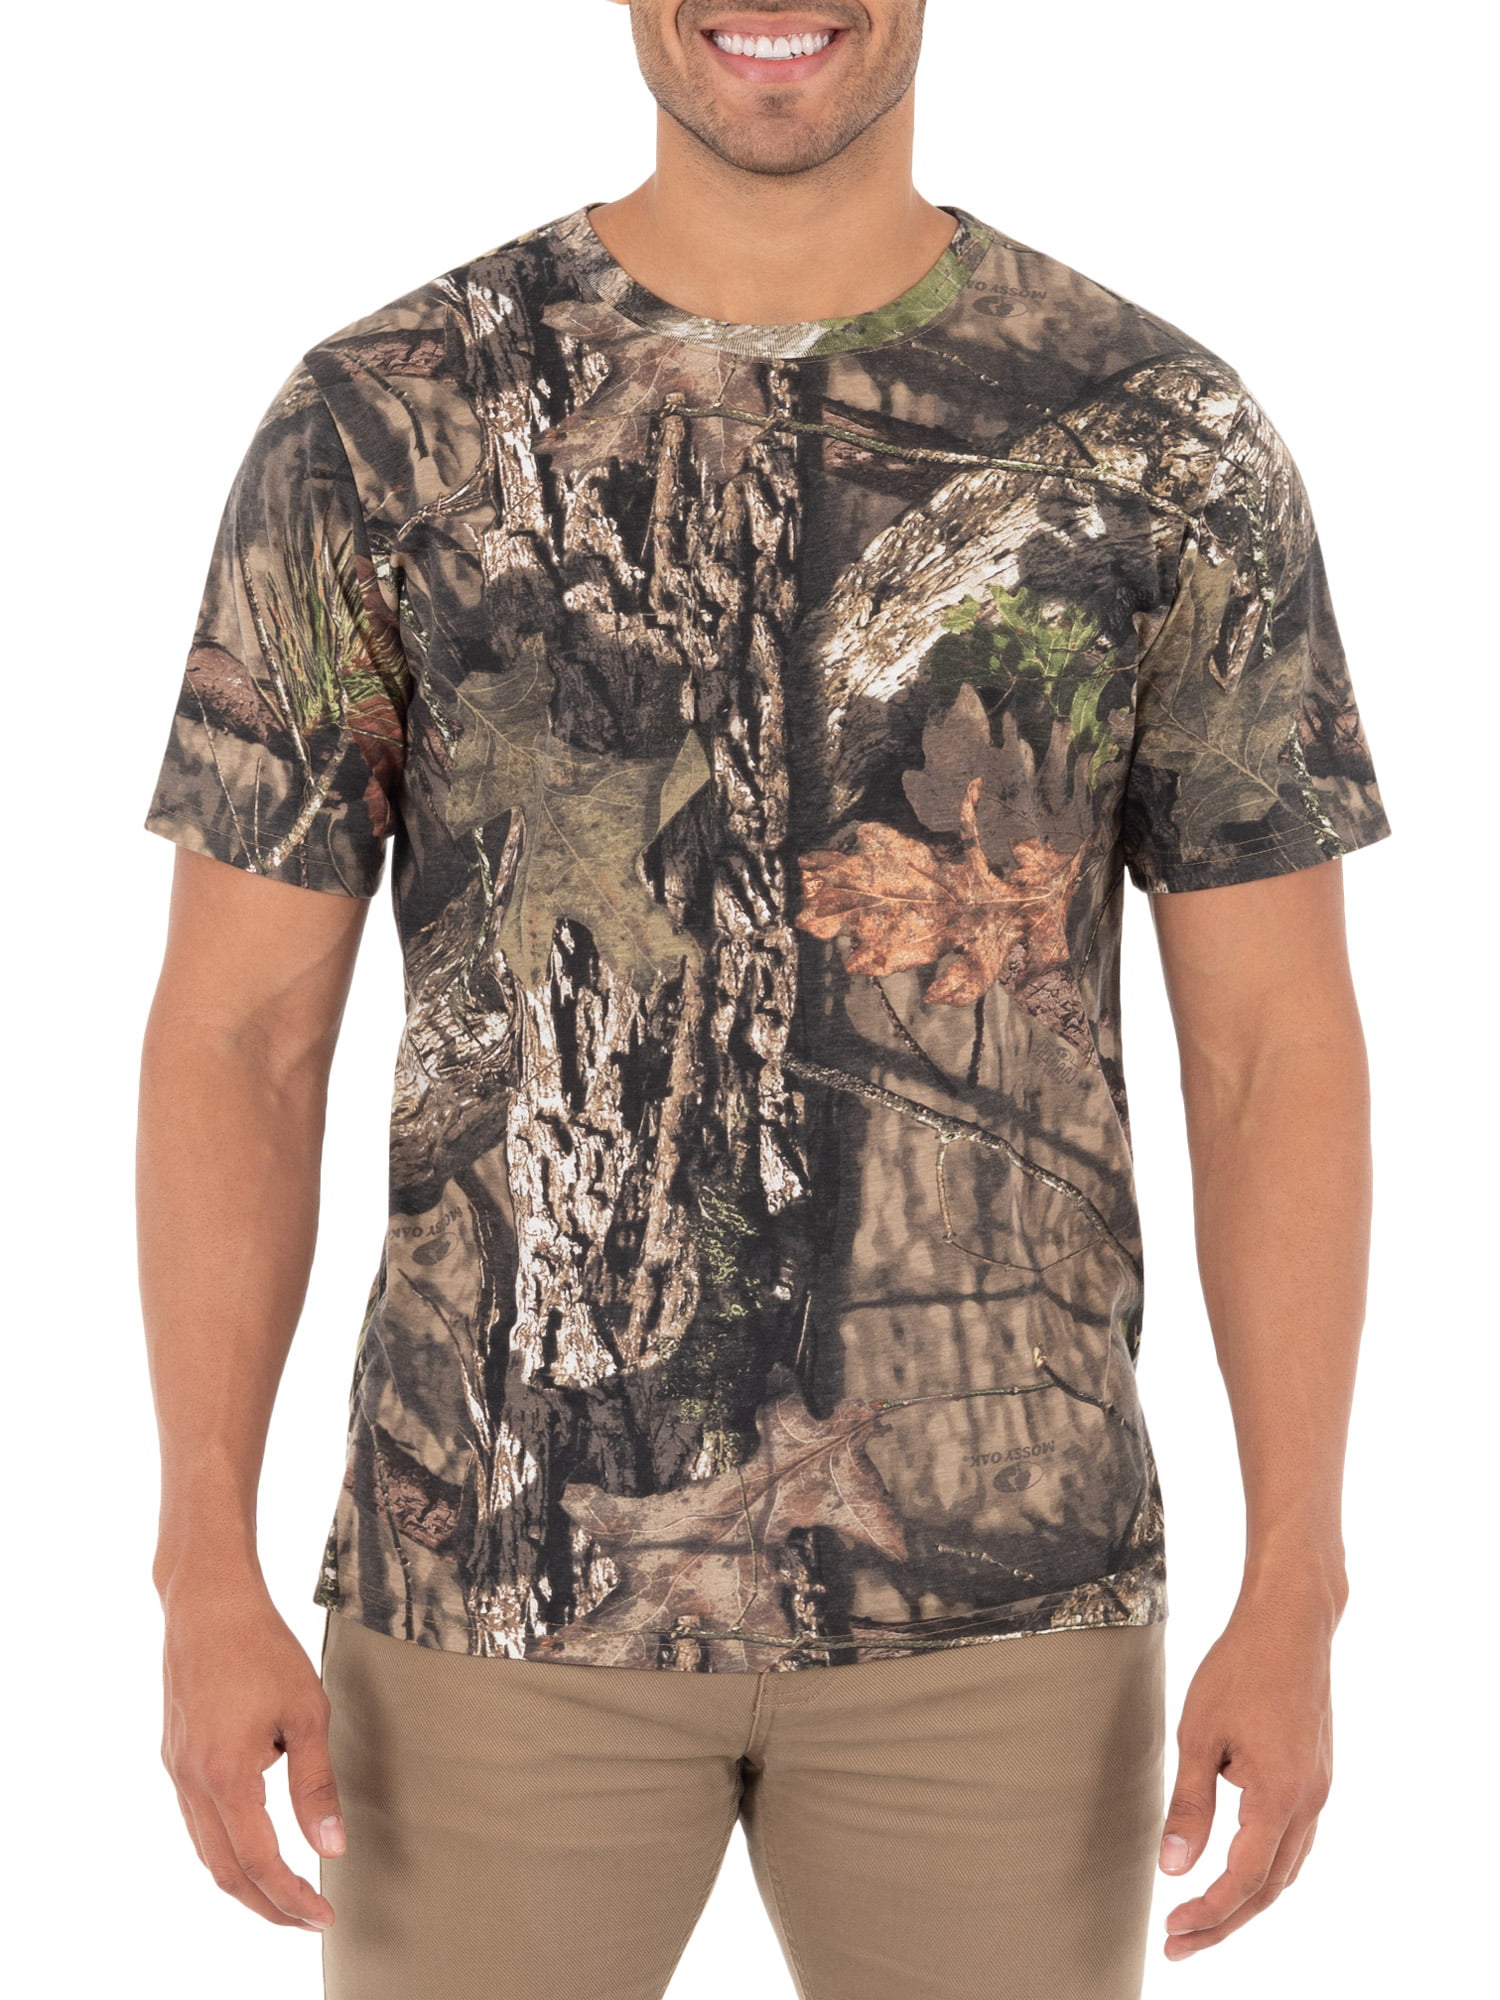 Details about   Best Match Country Life Duck Hunter Popular Premium T-Shirt Size S to 3XL 